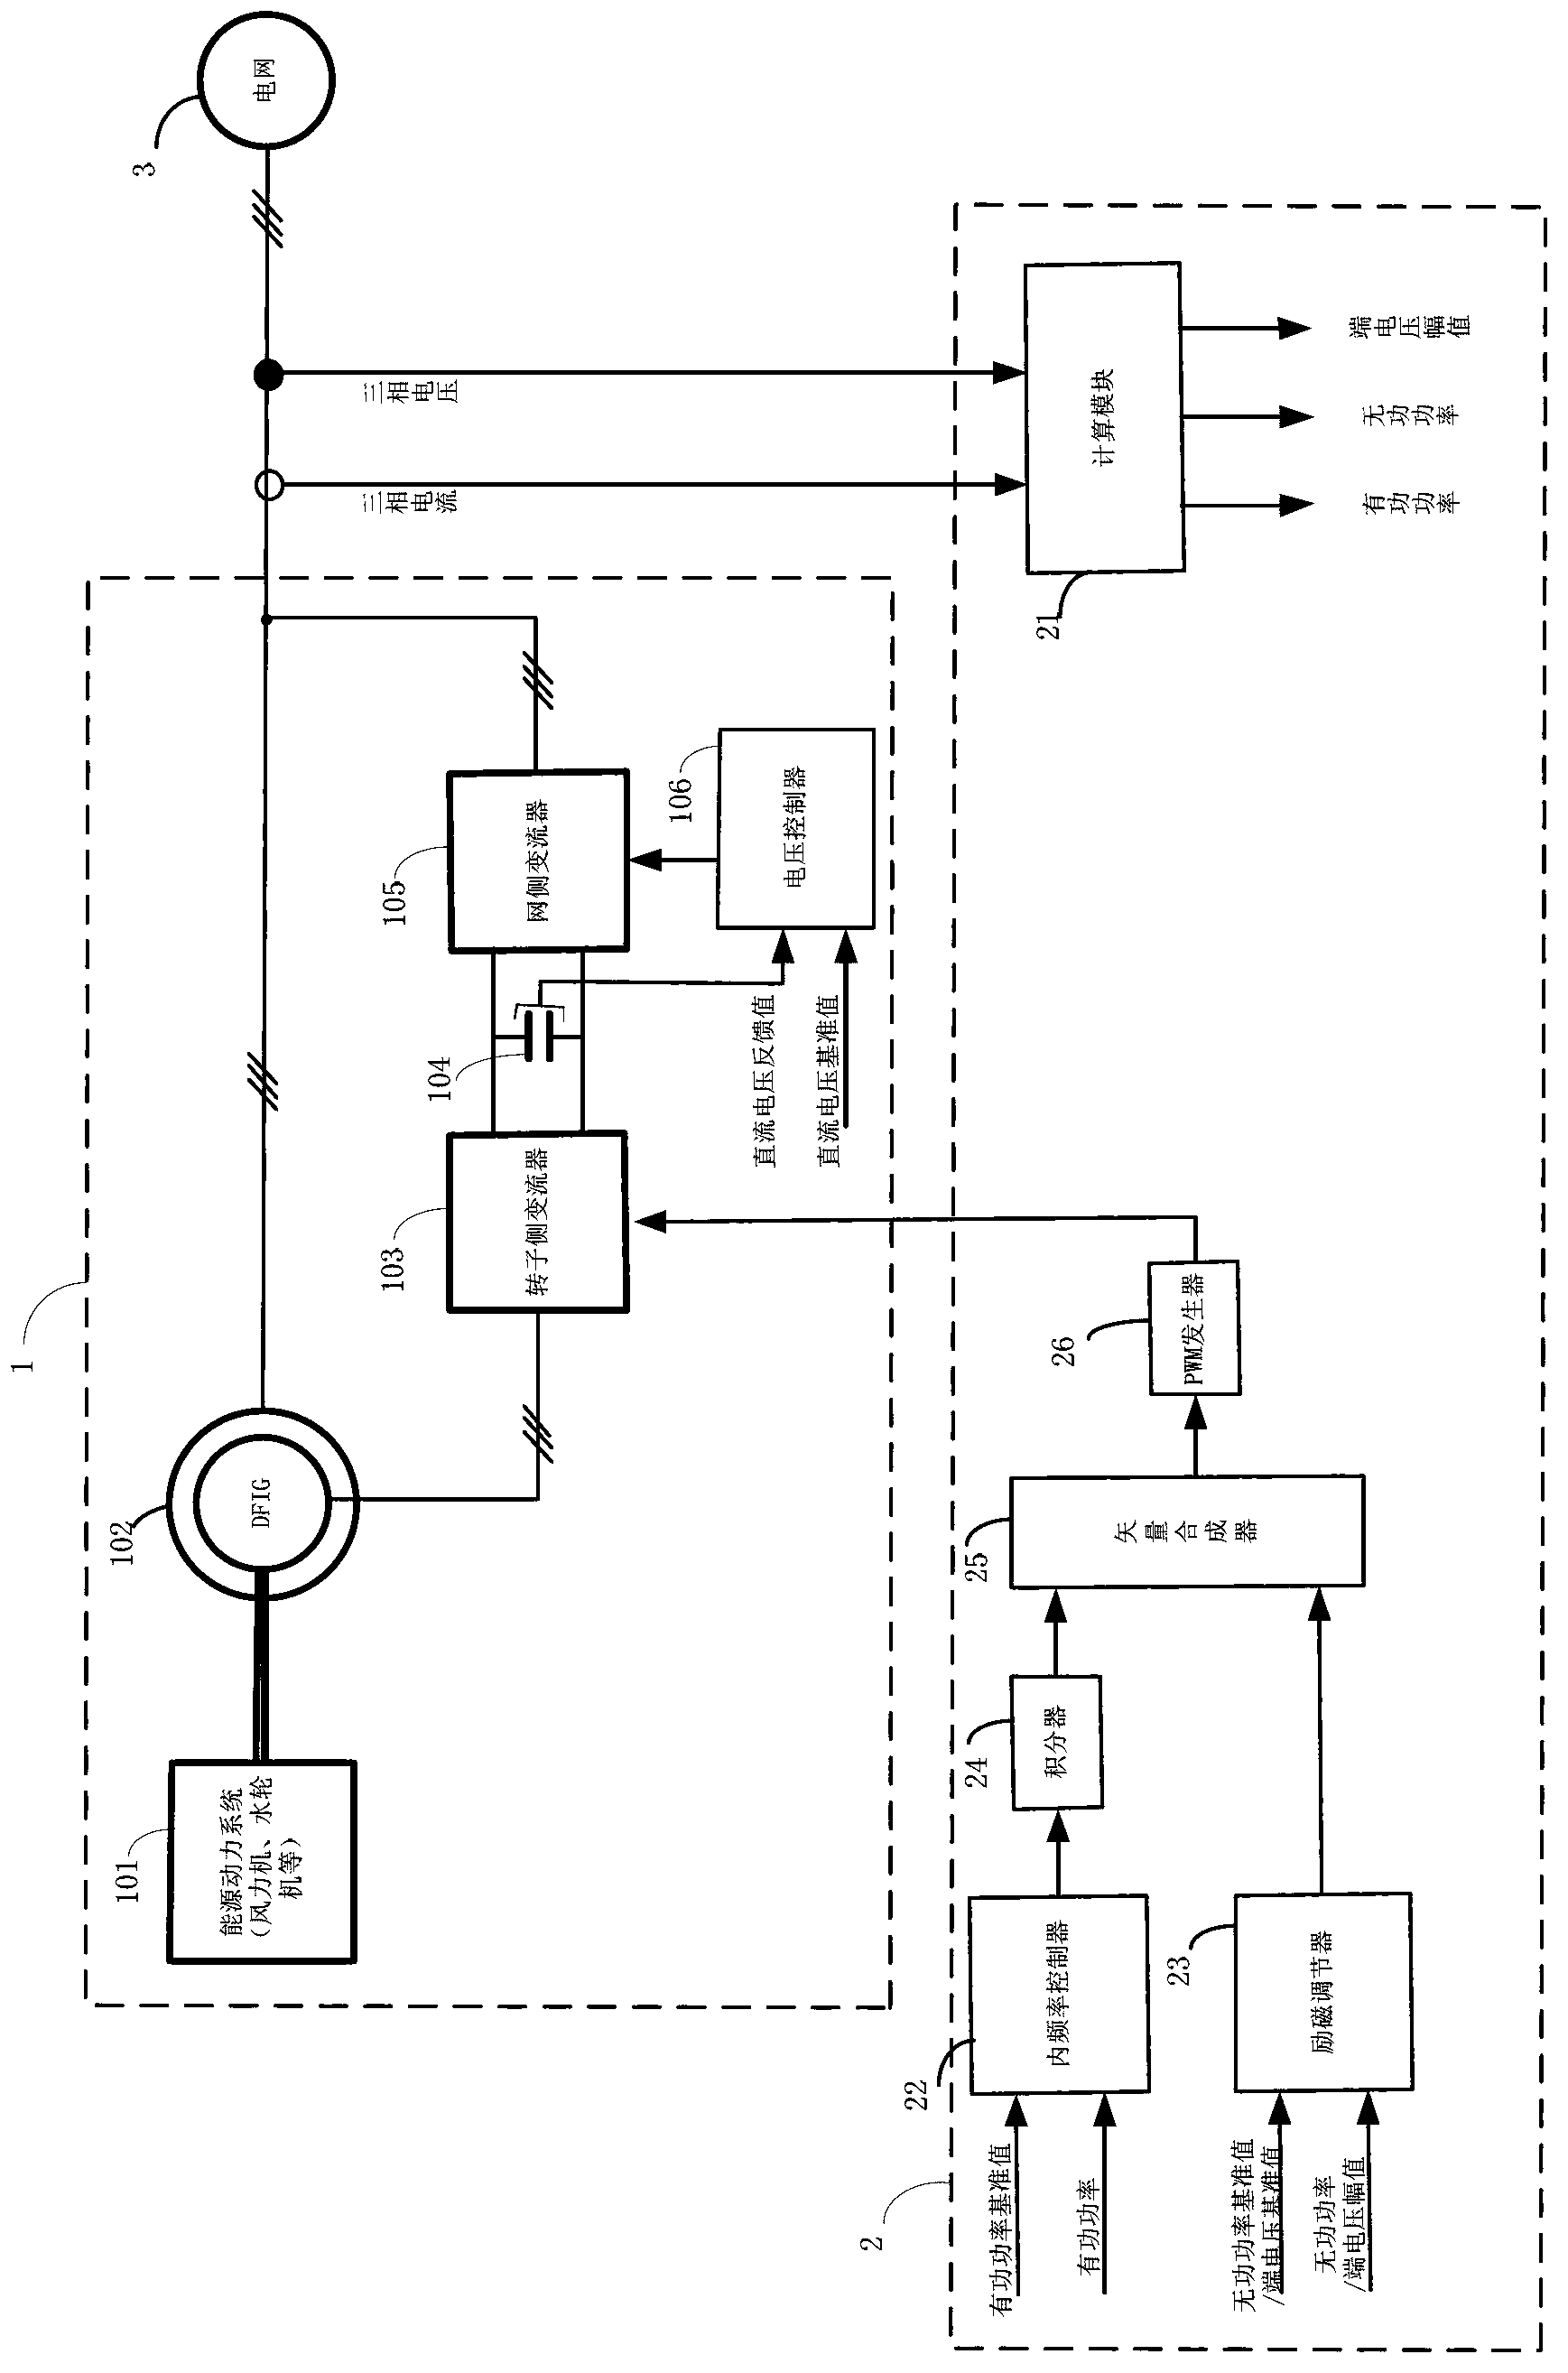 Doubly fed induction generator internal frequency synchronization method and device based on power balance